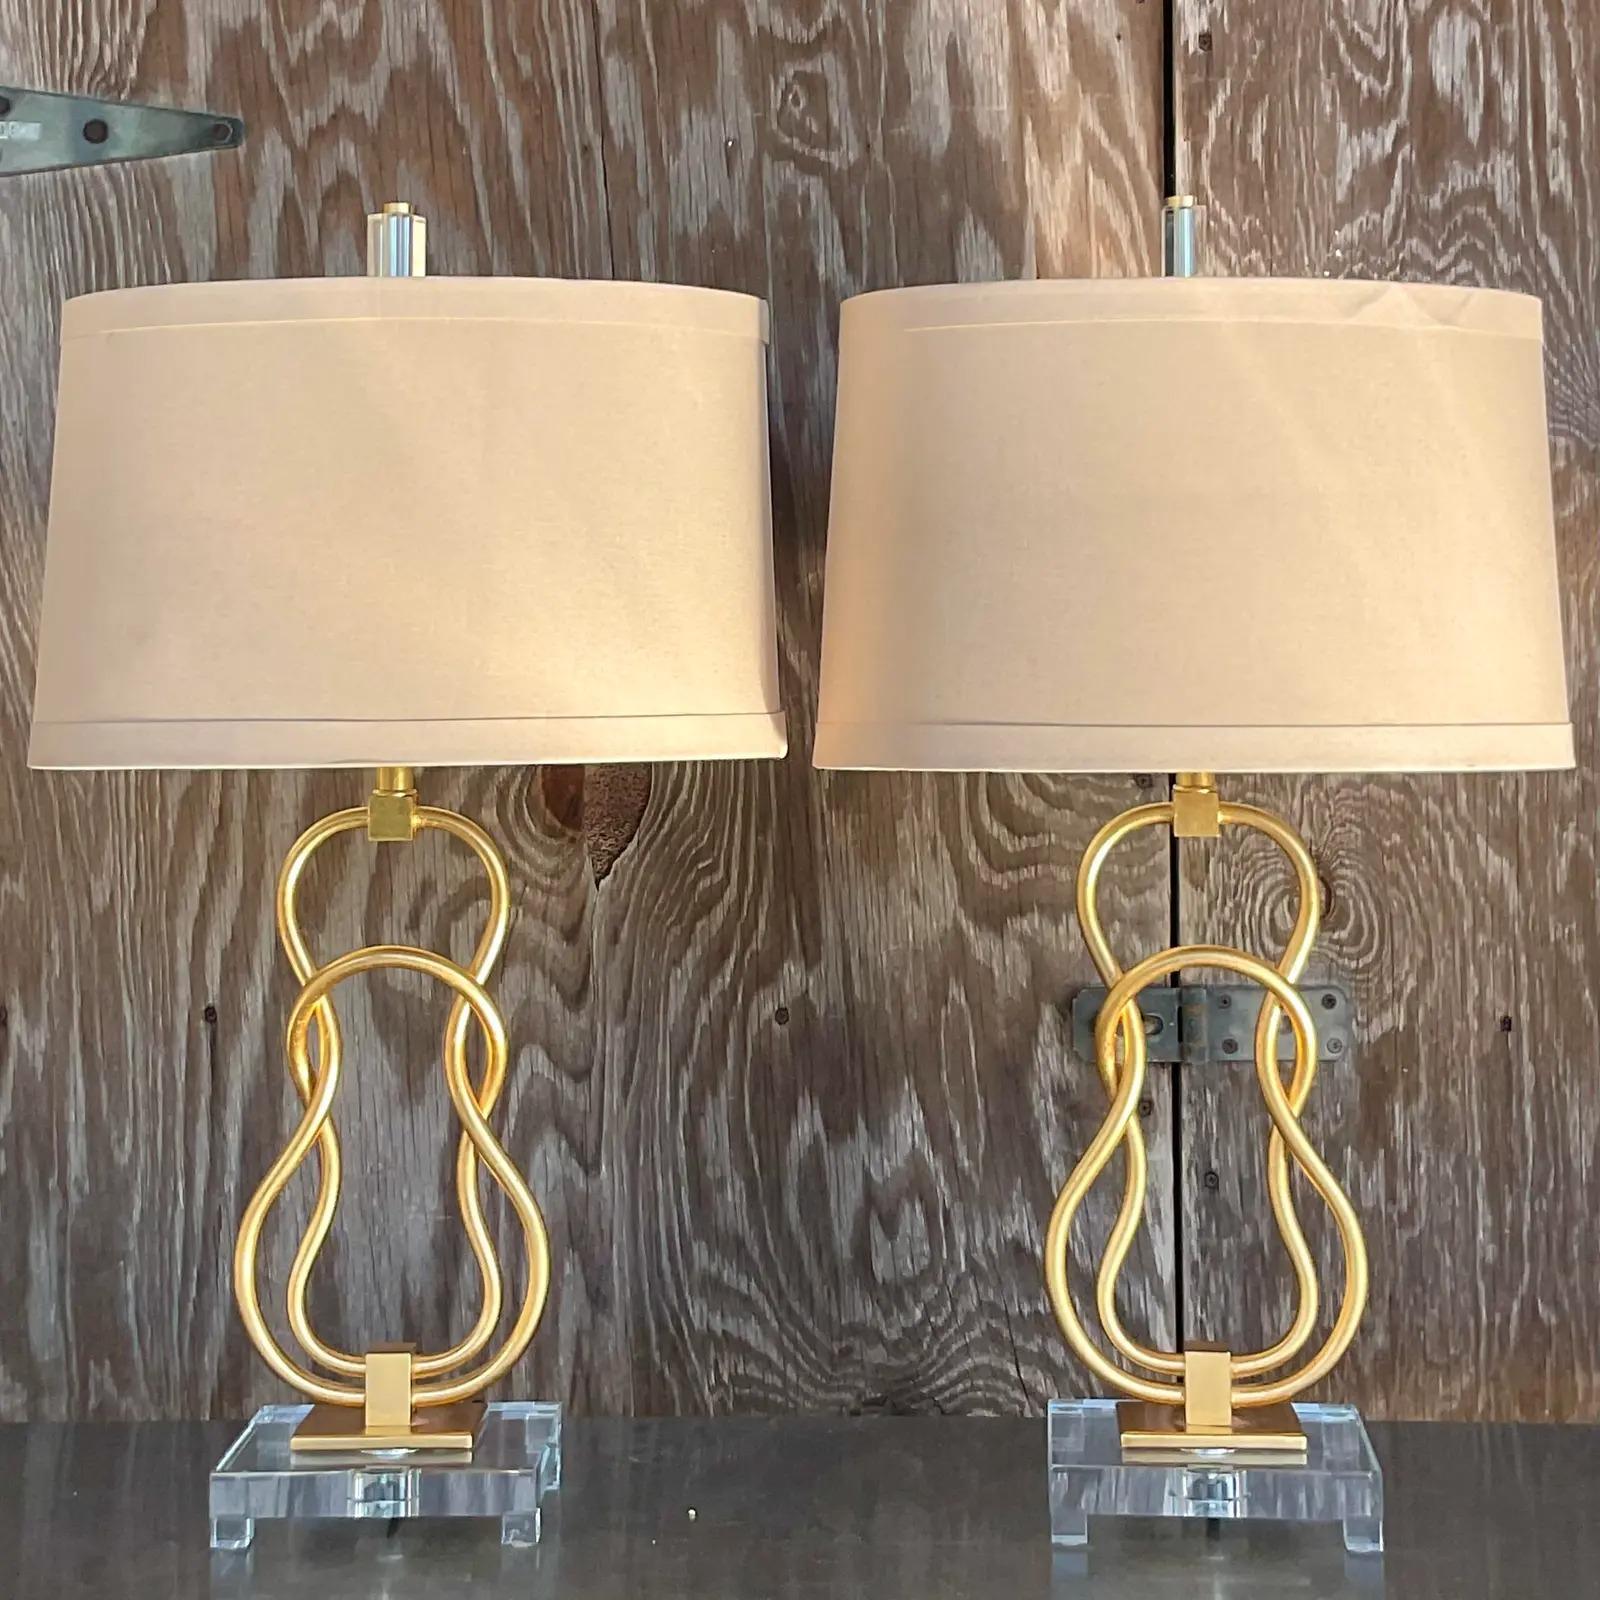 Vintage Contemporary Linked Gilt Rings Lamps - a Pair For Sale 1